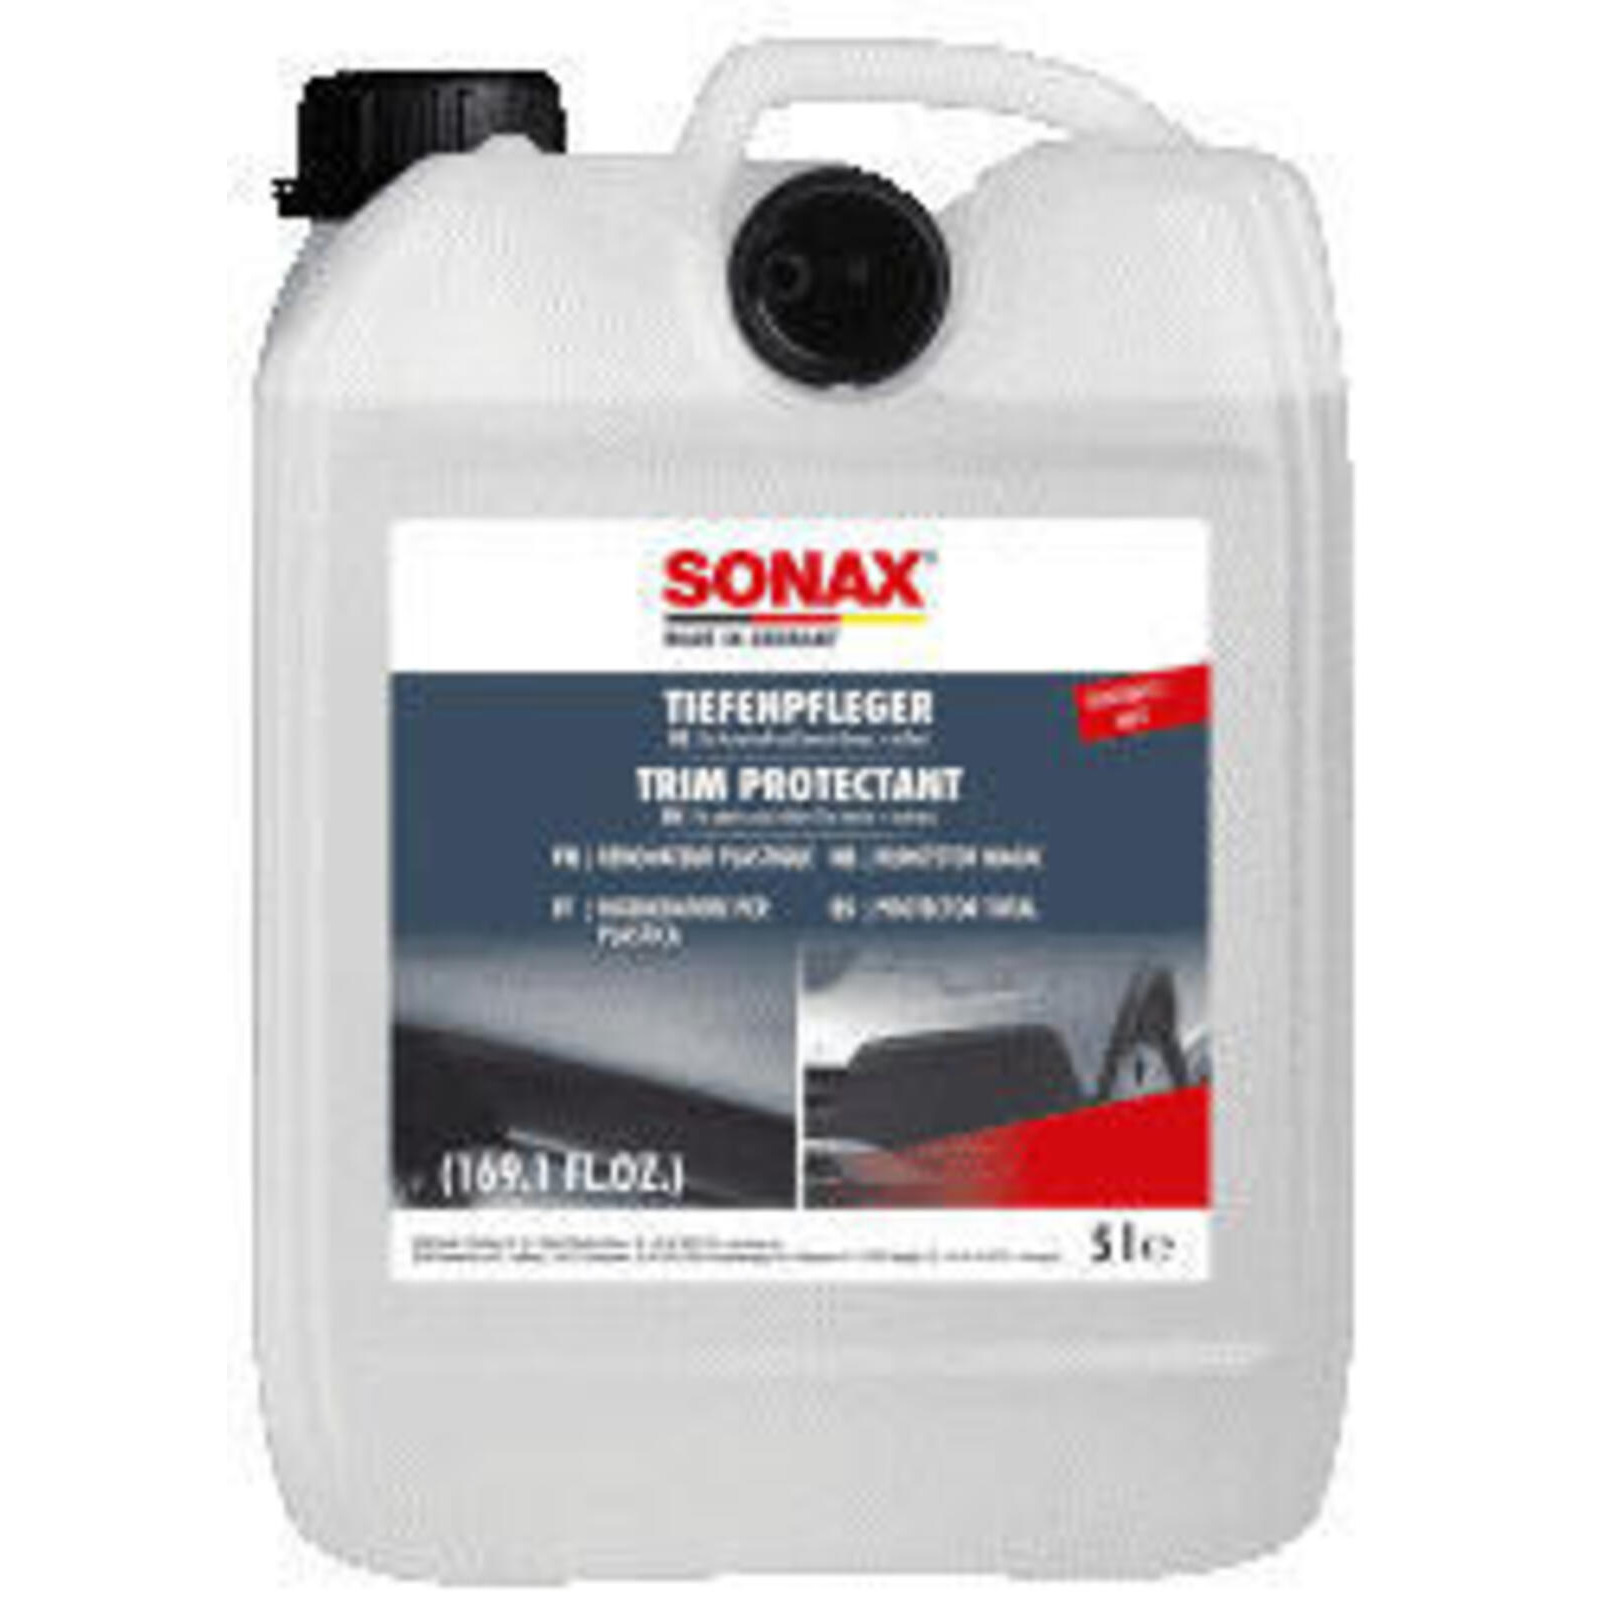 SONAX Synthetic Material Care Products Trim protectant silky matt